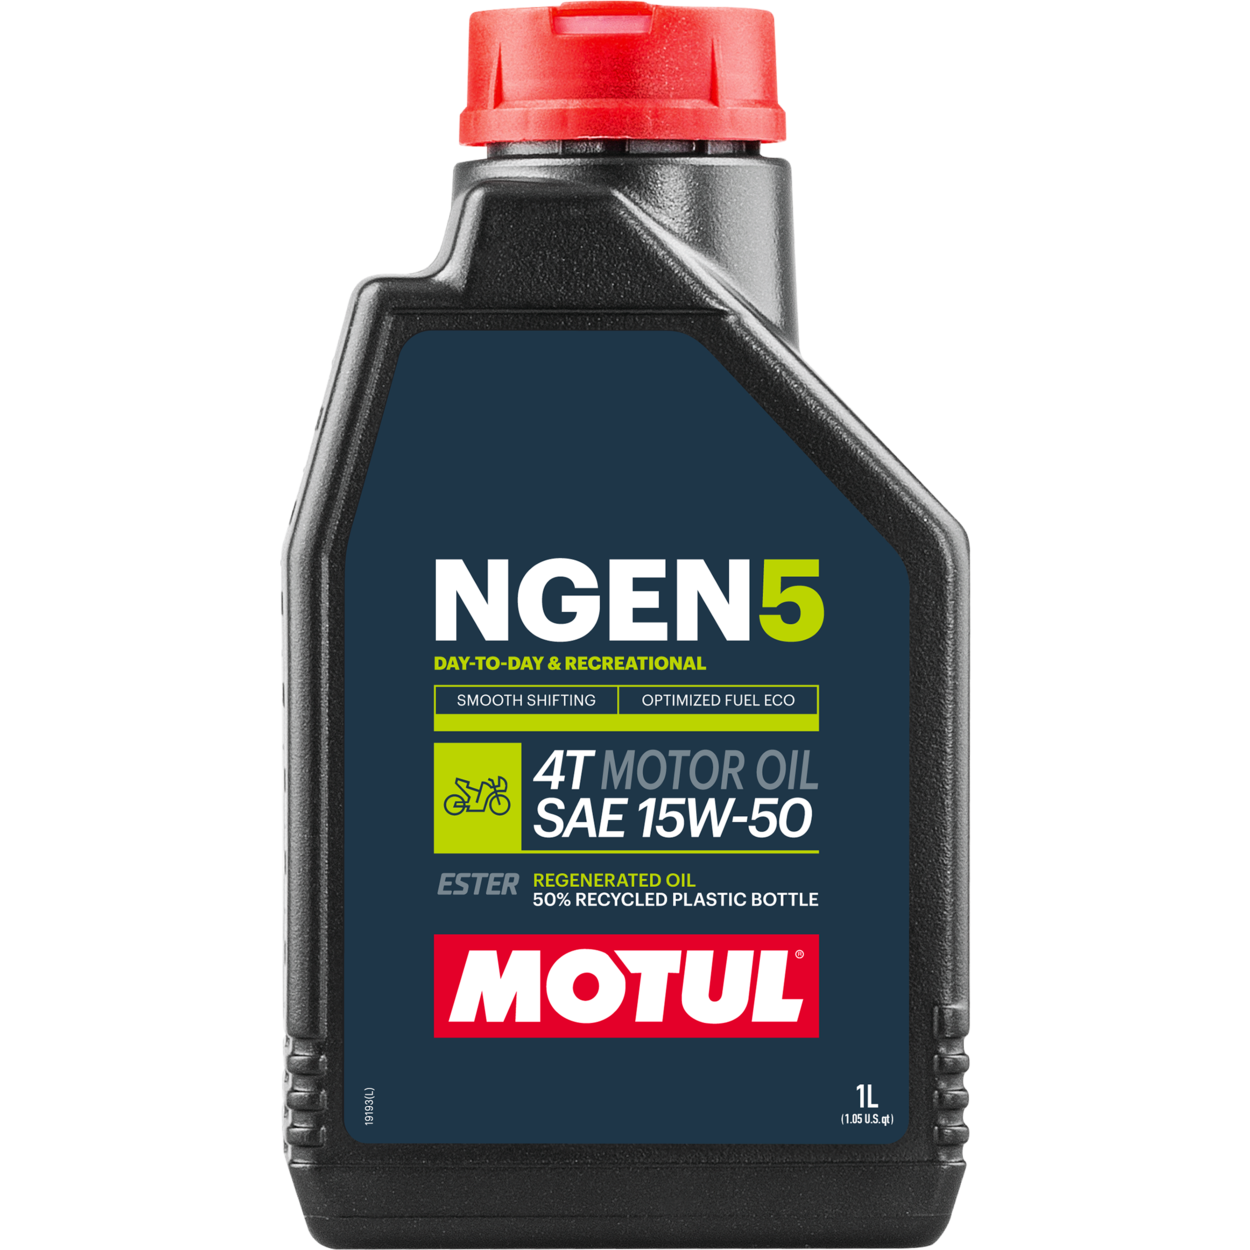 111833-1 MOTUL NGEN 5 15W-50 4T is an innovative, sustainable motor oil based on a combination of finest base oils and additives blended with synthetic esters and high quality regenerated oils.